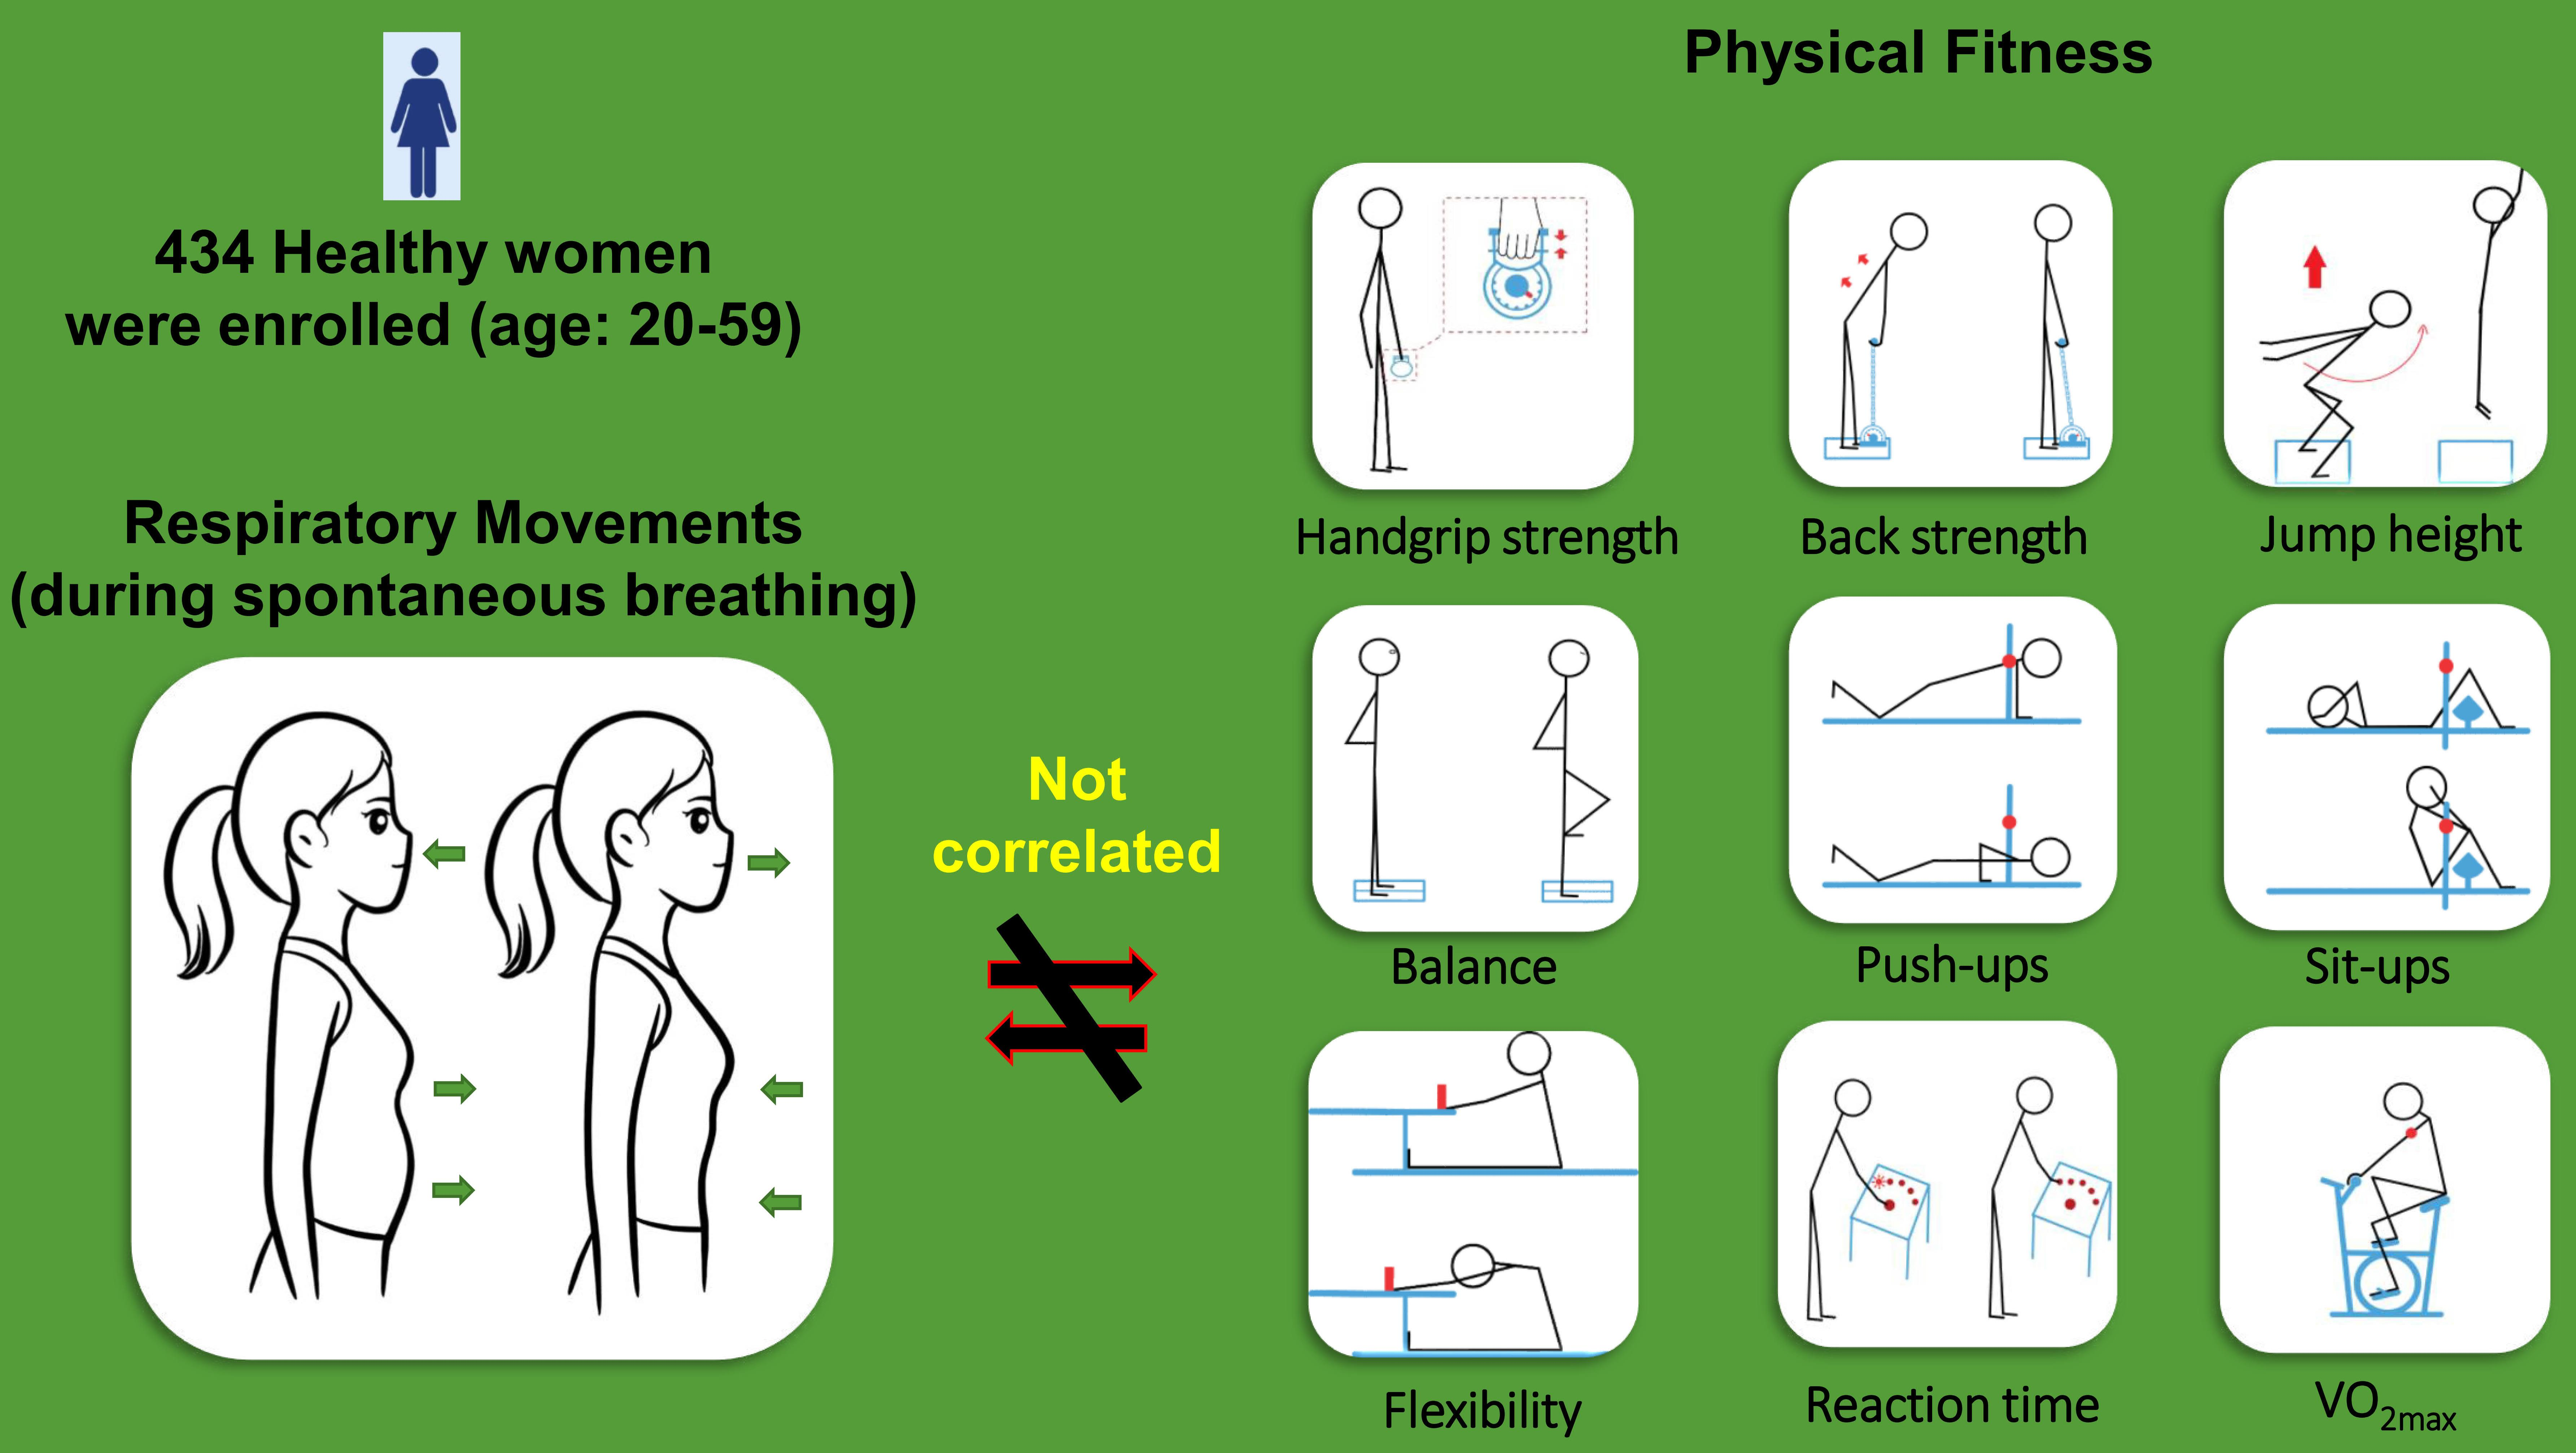 IJERPH | Free Full-Text | Women’s Respiratory Movements during  Spontaneous Breathing and Physical Fitness: A Cross-Sectional,  Correlational Study